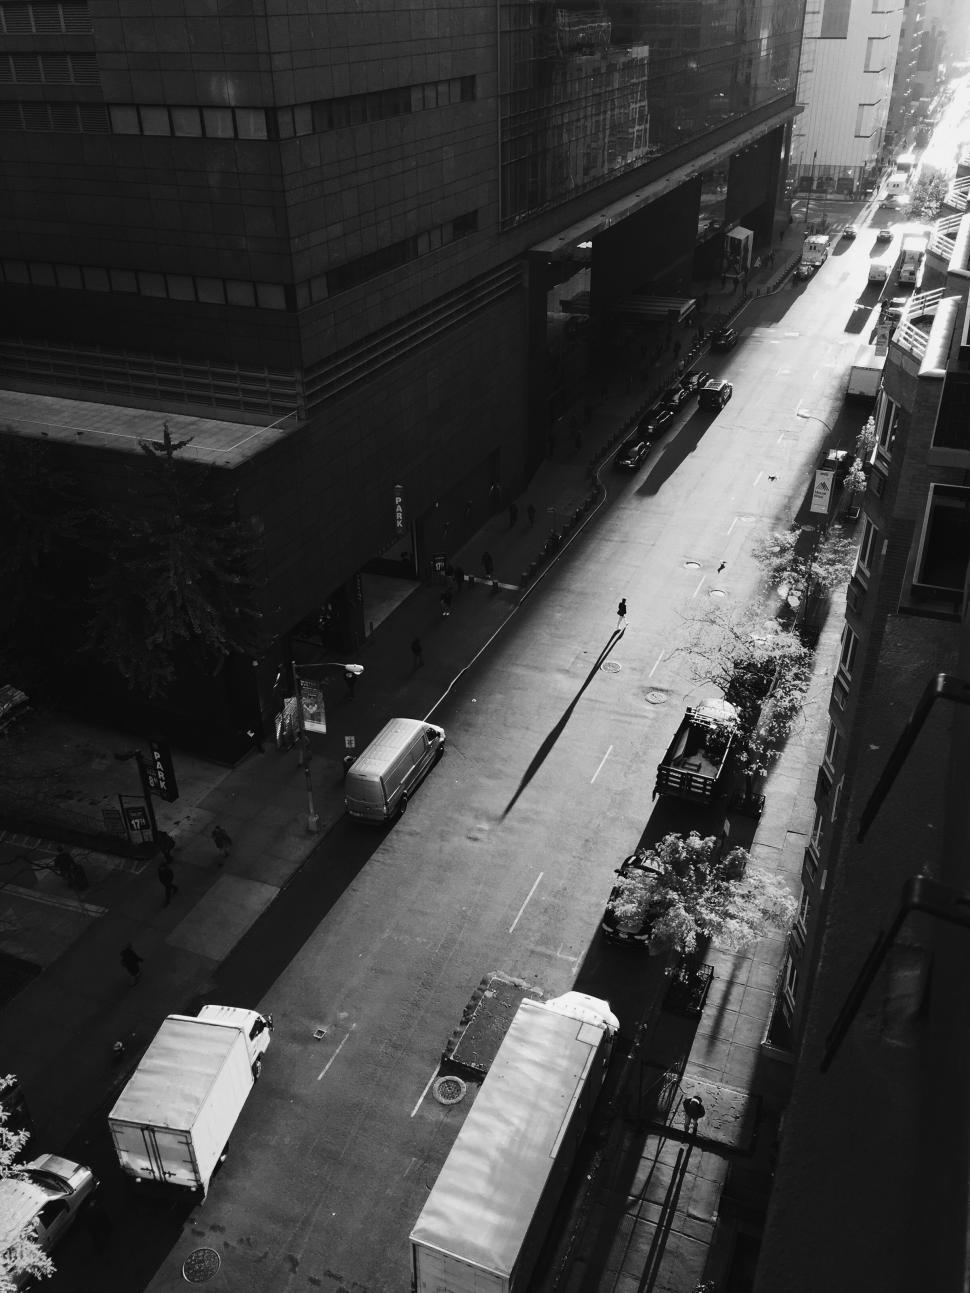 Free Image of City Road with one person walking with shadow - Monochrome 